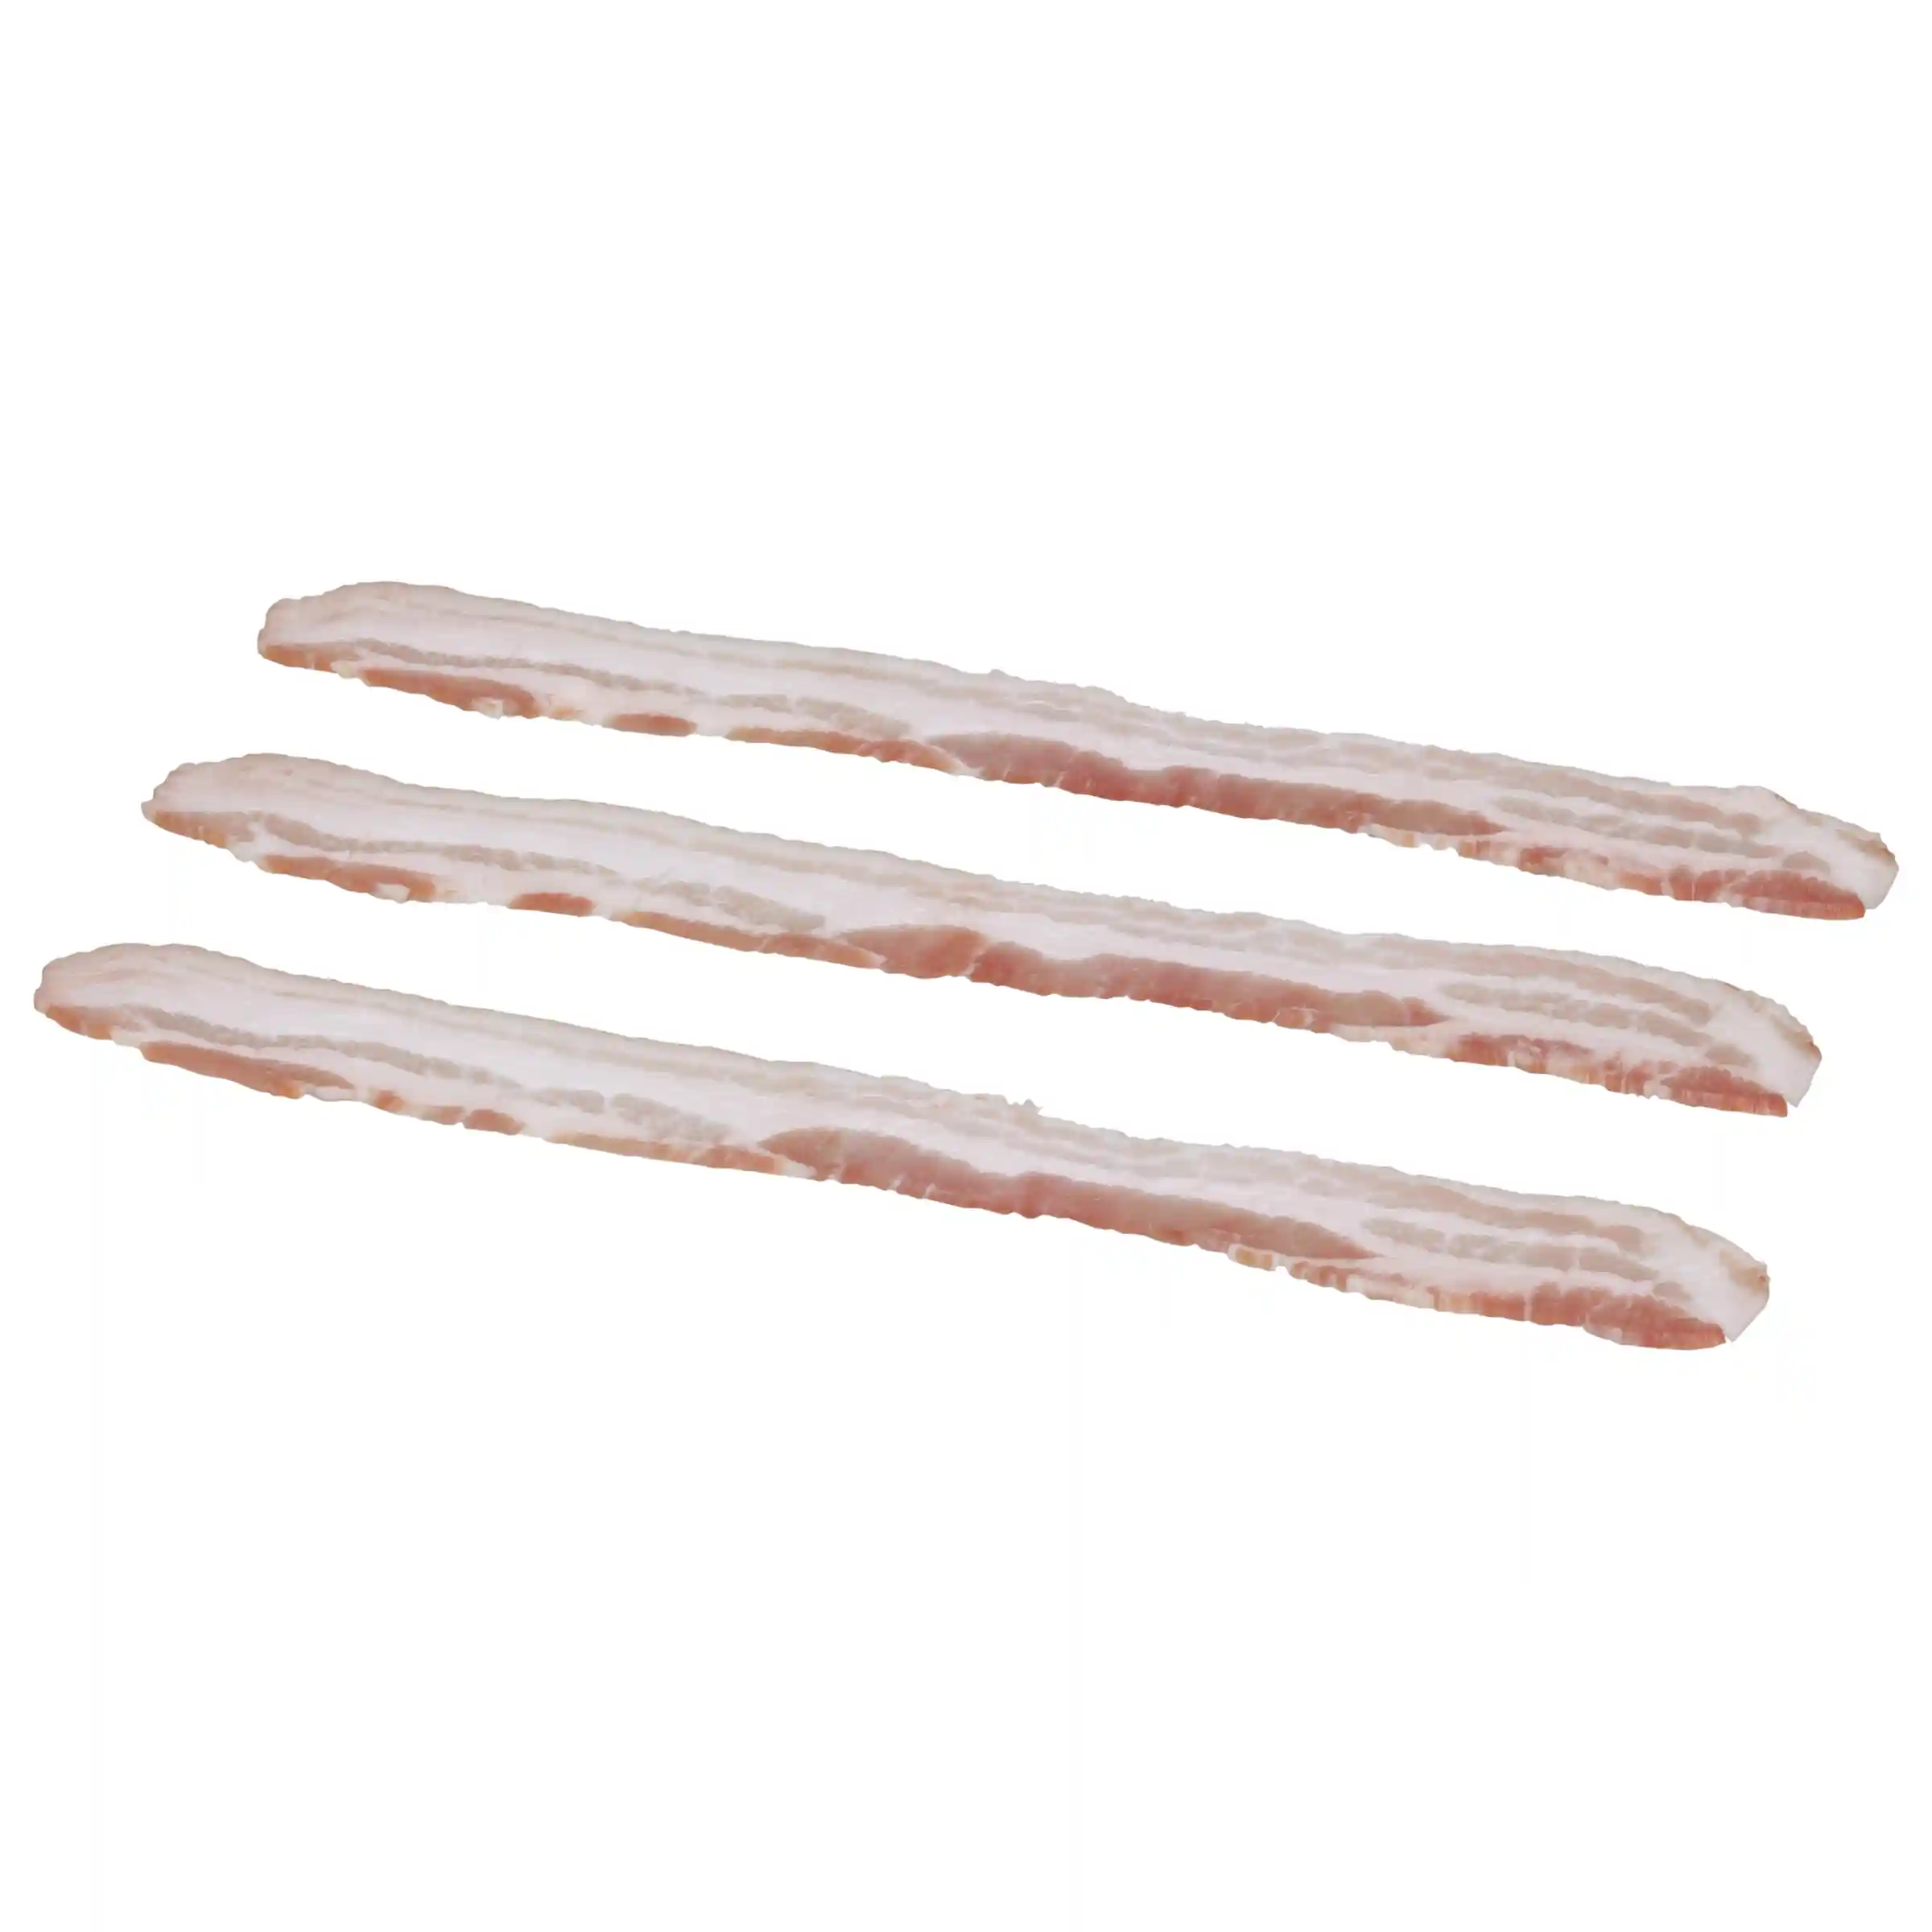 Wright® Brand Naturally Applewood Smoked Thick Sliced Bacon, Flat-Pack®, 15 Lbs, 10-14 Slices per Pound, Gas Flushed_image_11